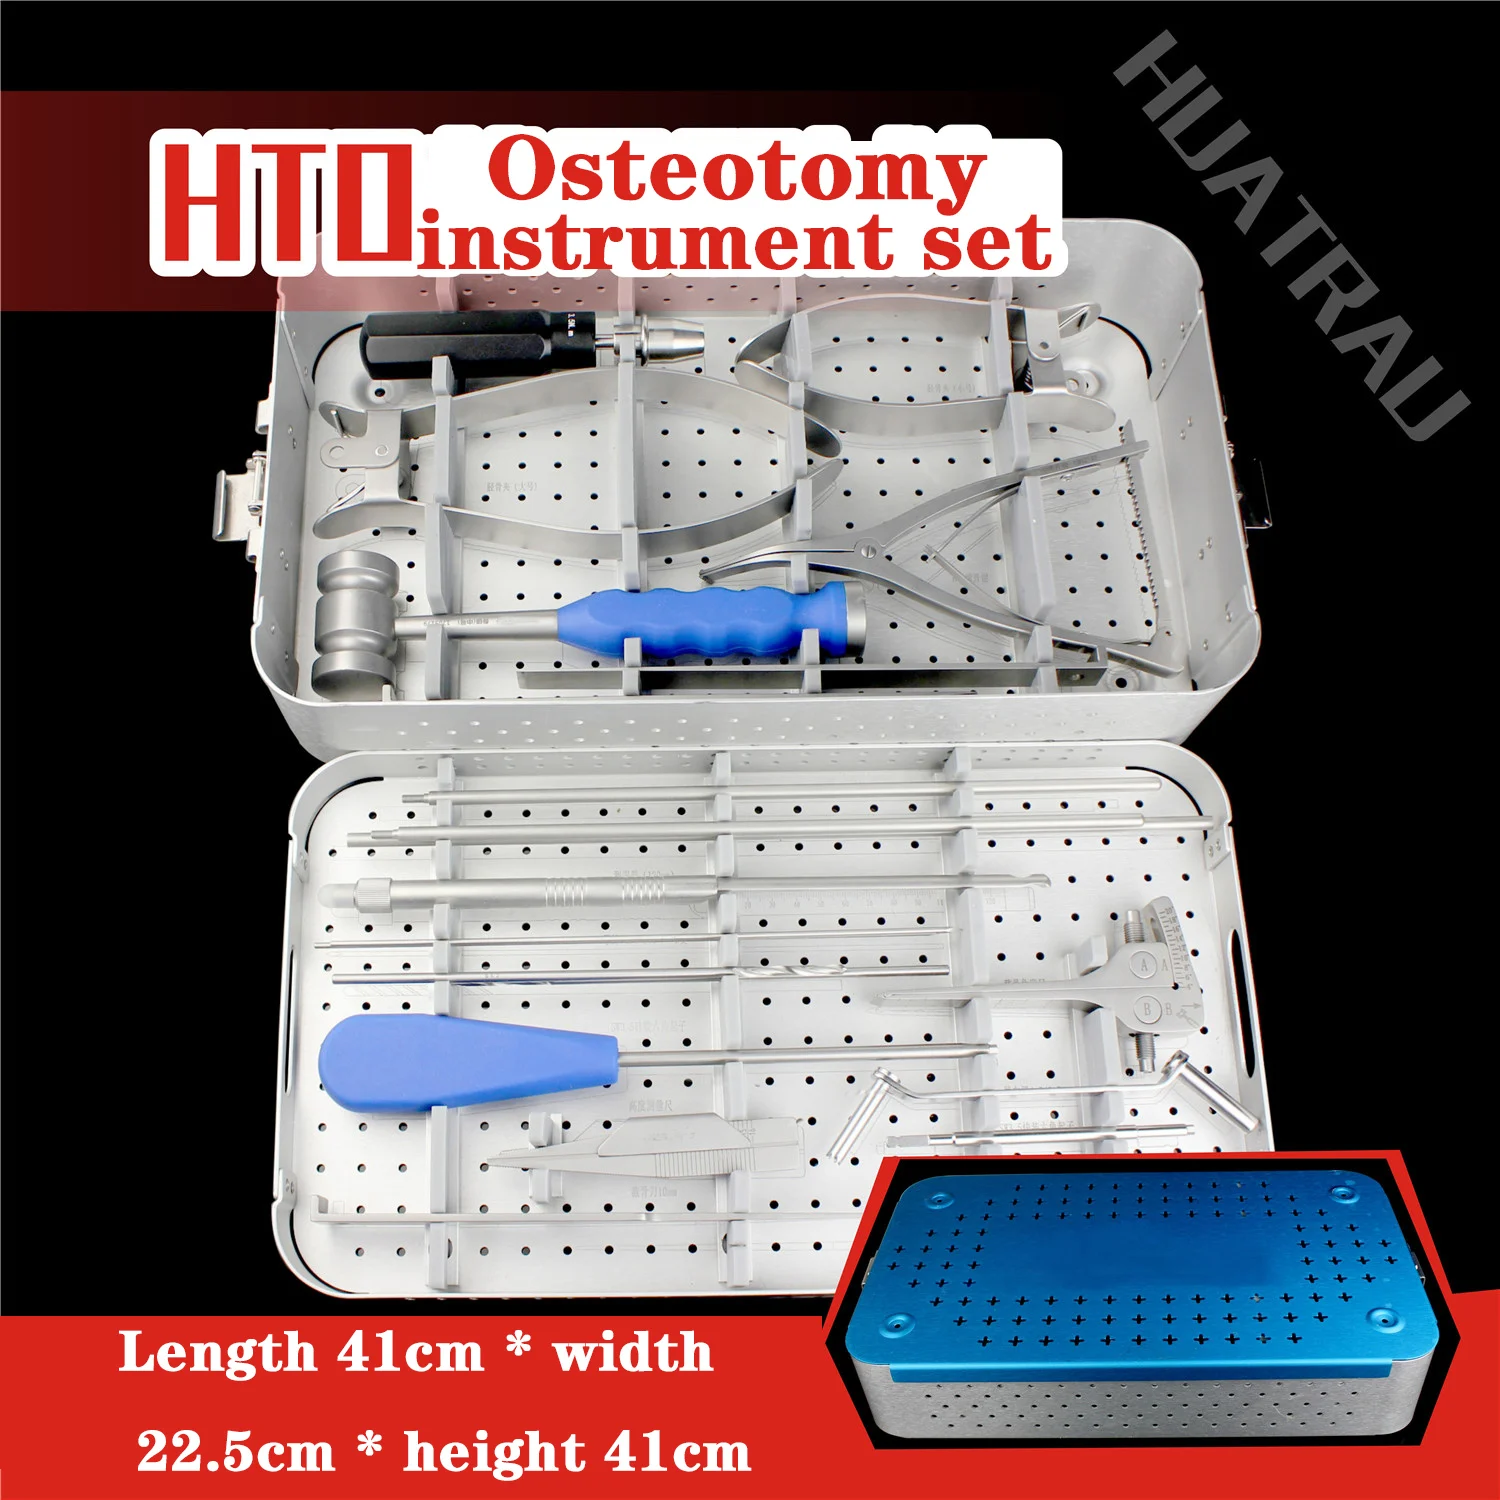 HTO Orthopedic instrument set medical tibial plateau joint High position osteotomy tool kit osteotome substitution Arthrectomy